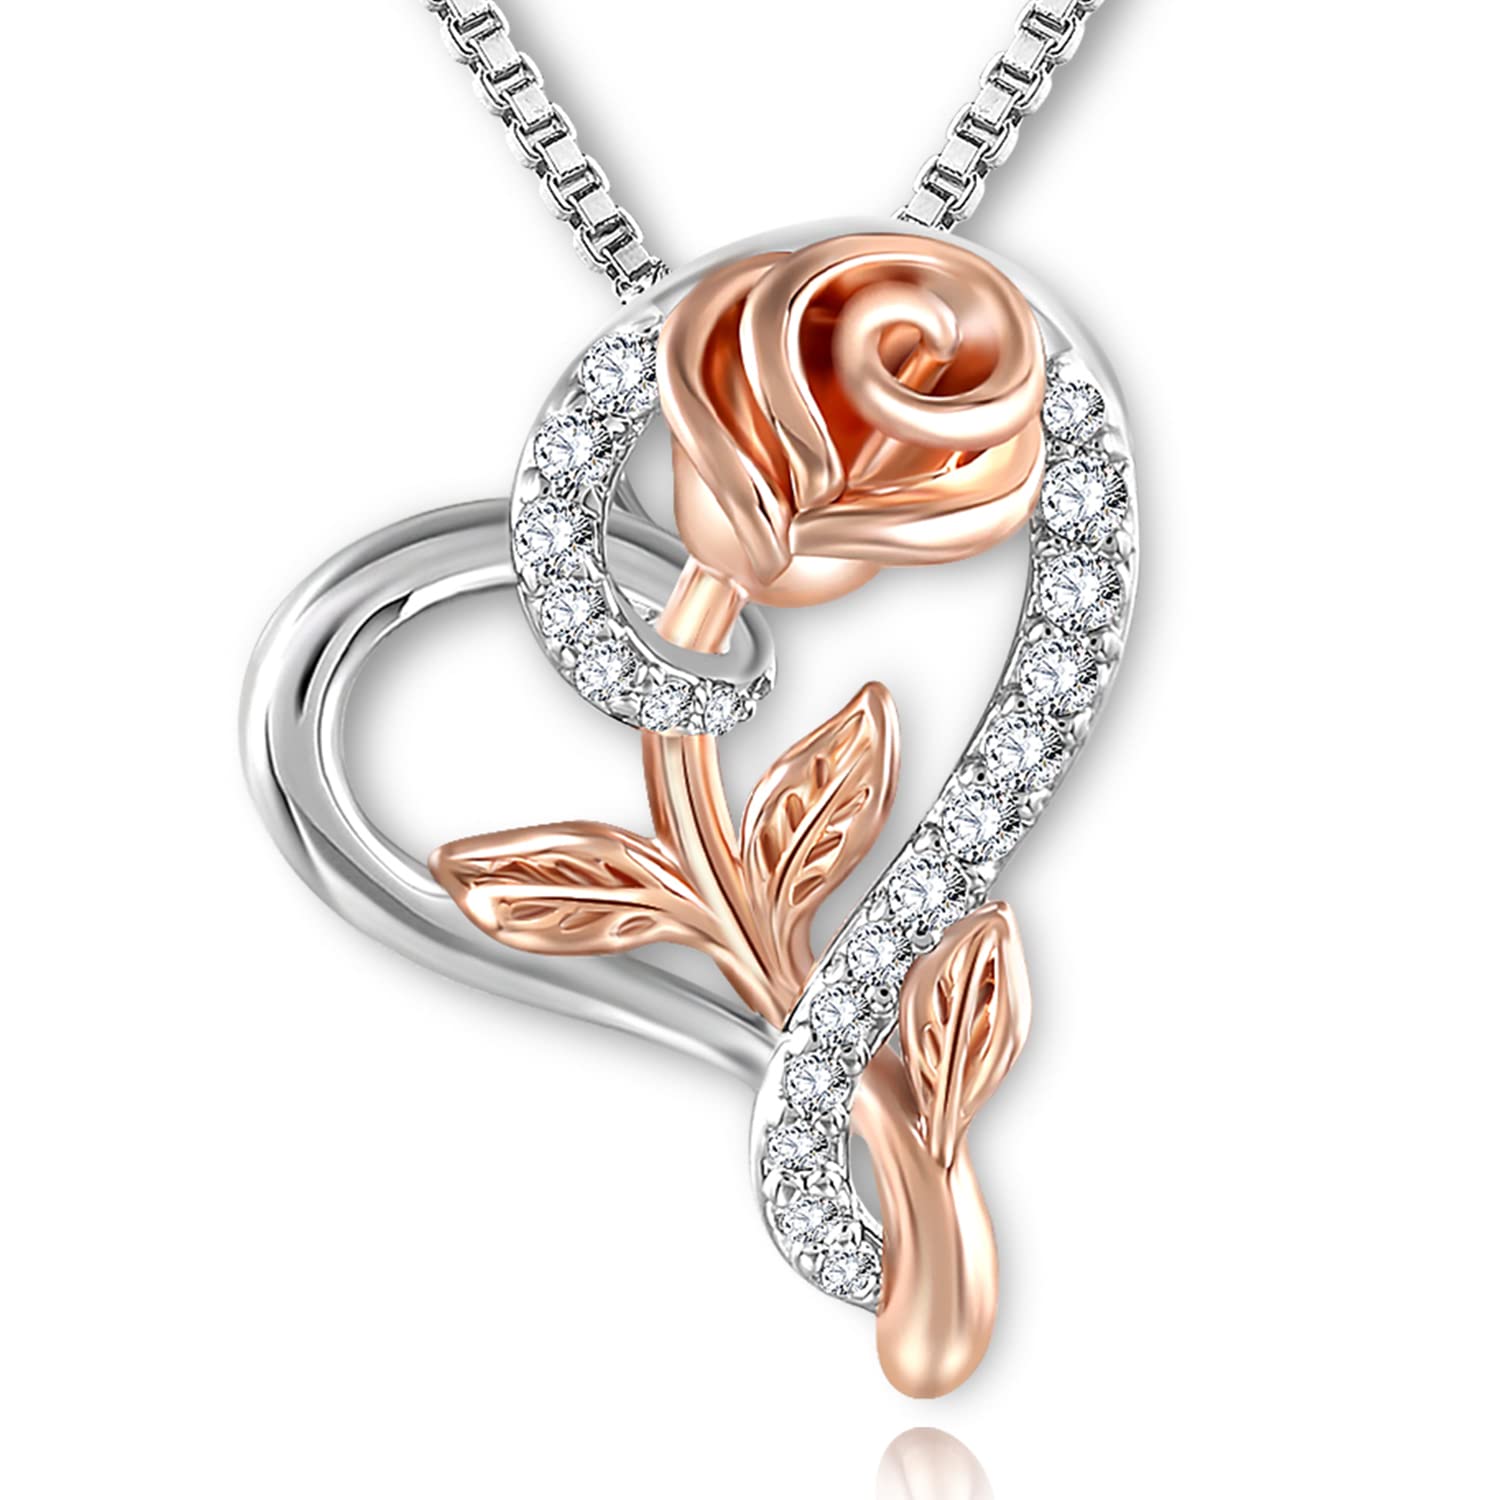 Book Cover Valentines Gift Rose Necklace for Women Cubic Zirconia Love Heart Pendant Necklace, Silver & Rose Gold 2-Tone Rose Pendant with Jewelry Box Birthday Gifts for Her 14H-Silver heart necklace